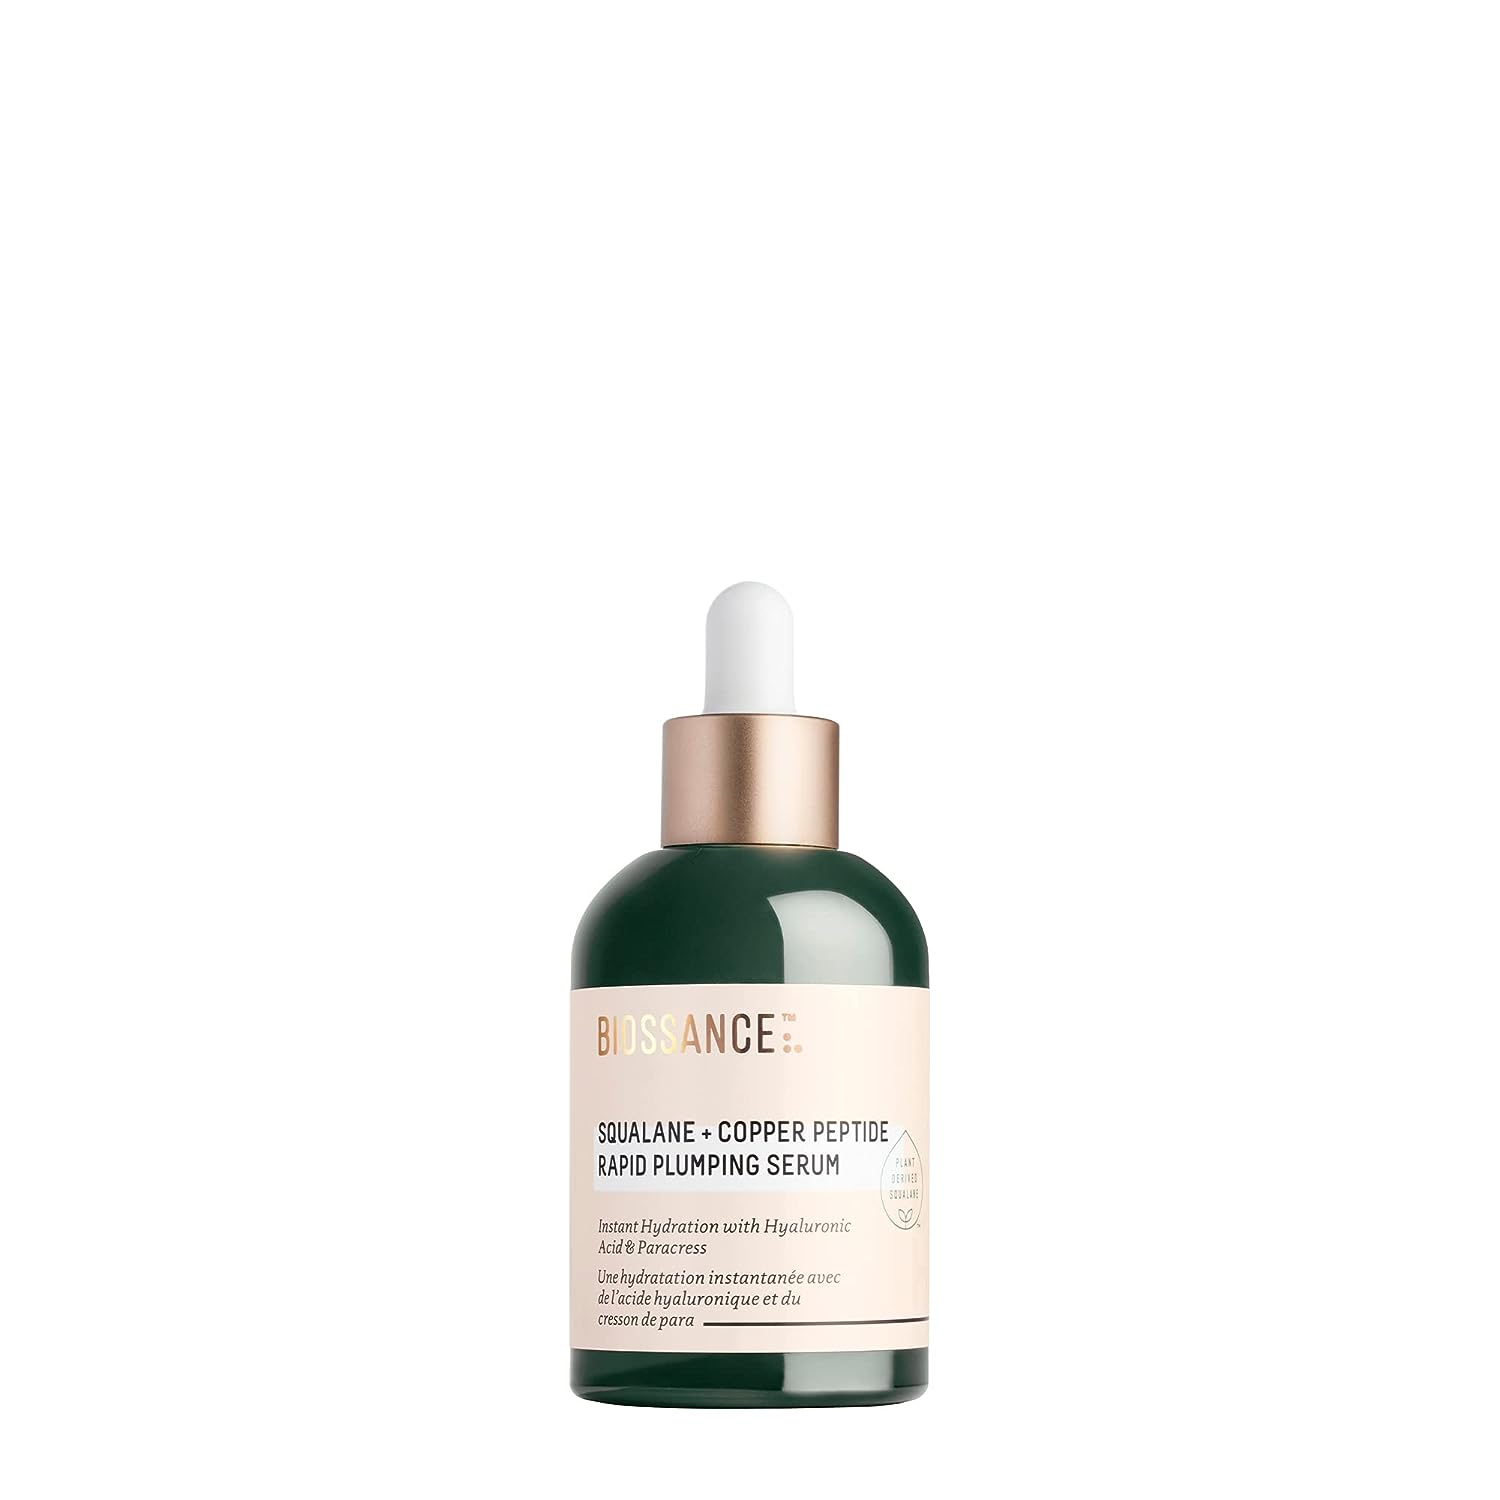 ''Biossance Squalane + Copper Peptide Rapid Plumping Serum._Powerfully Hydrating Face Serum that Inst